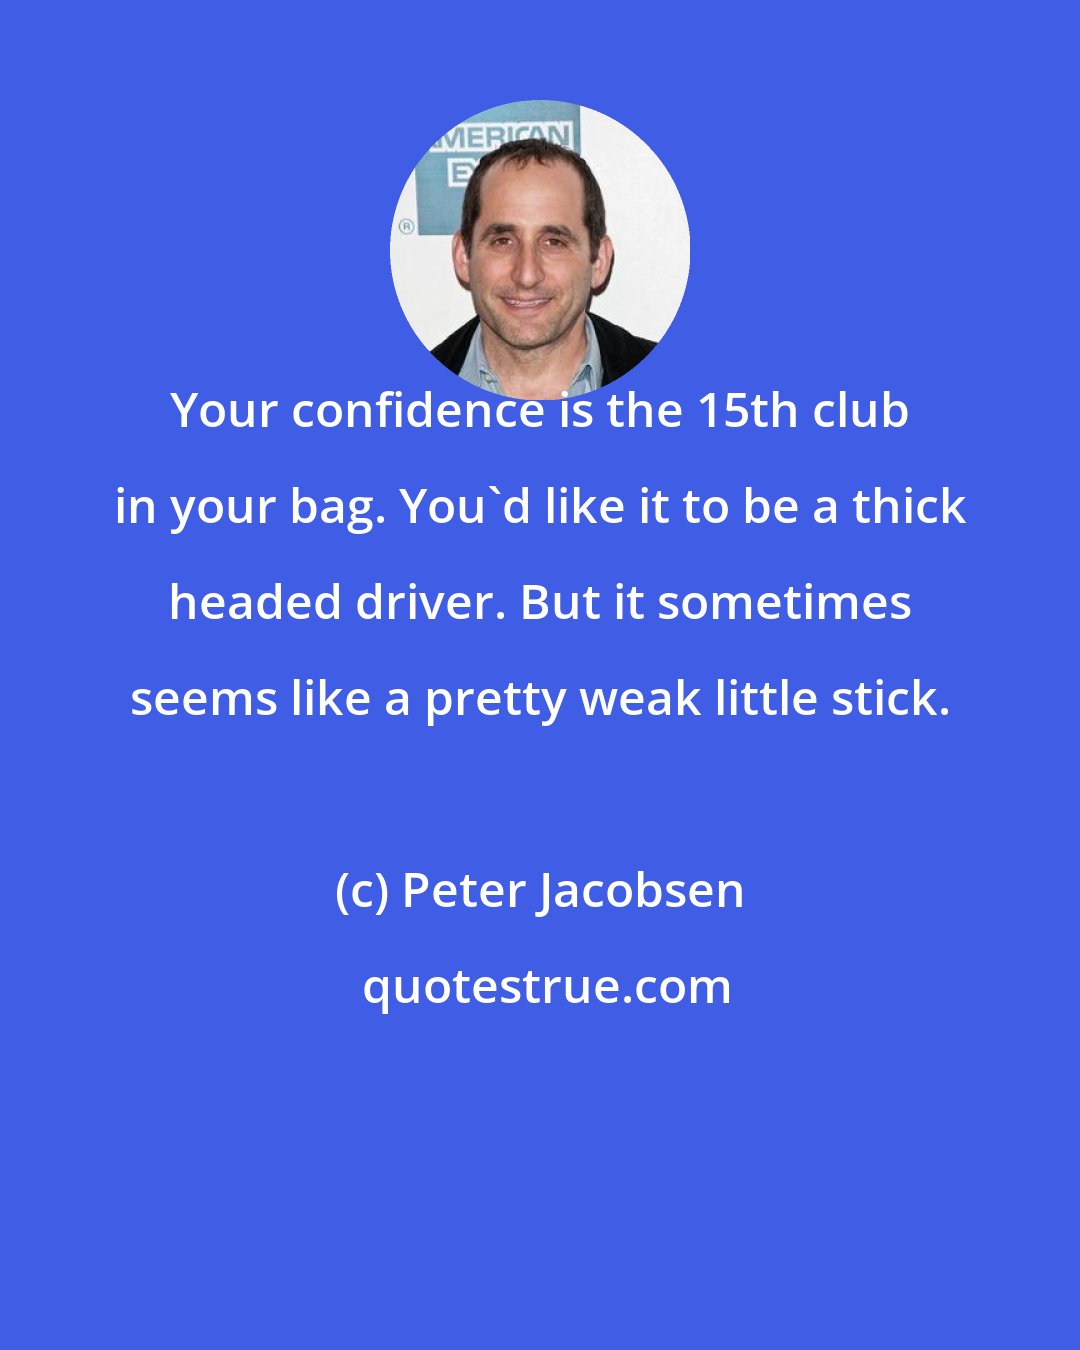 Peter Jacobsen: Your confidence is the 15th club in your bag. You'd like it to be a thick headed driver. But it sometimes seems like a pretty weak little stick.